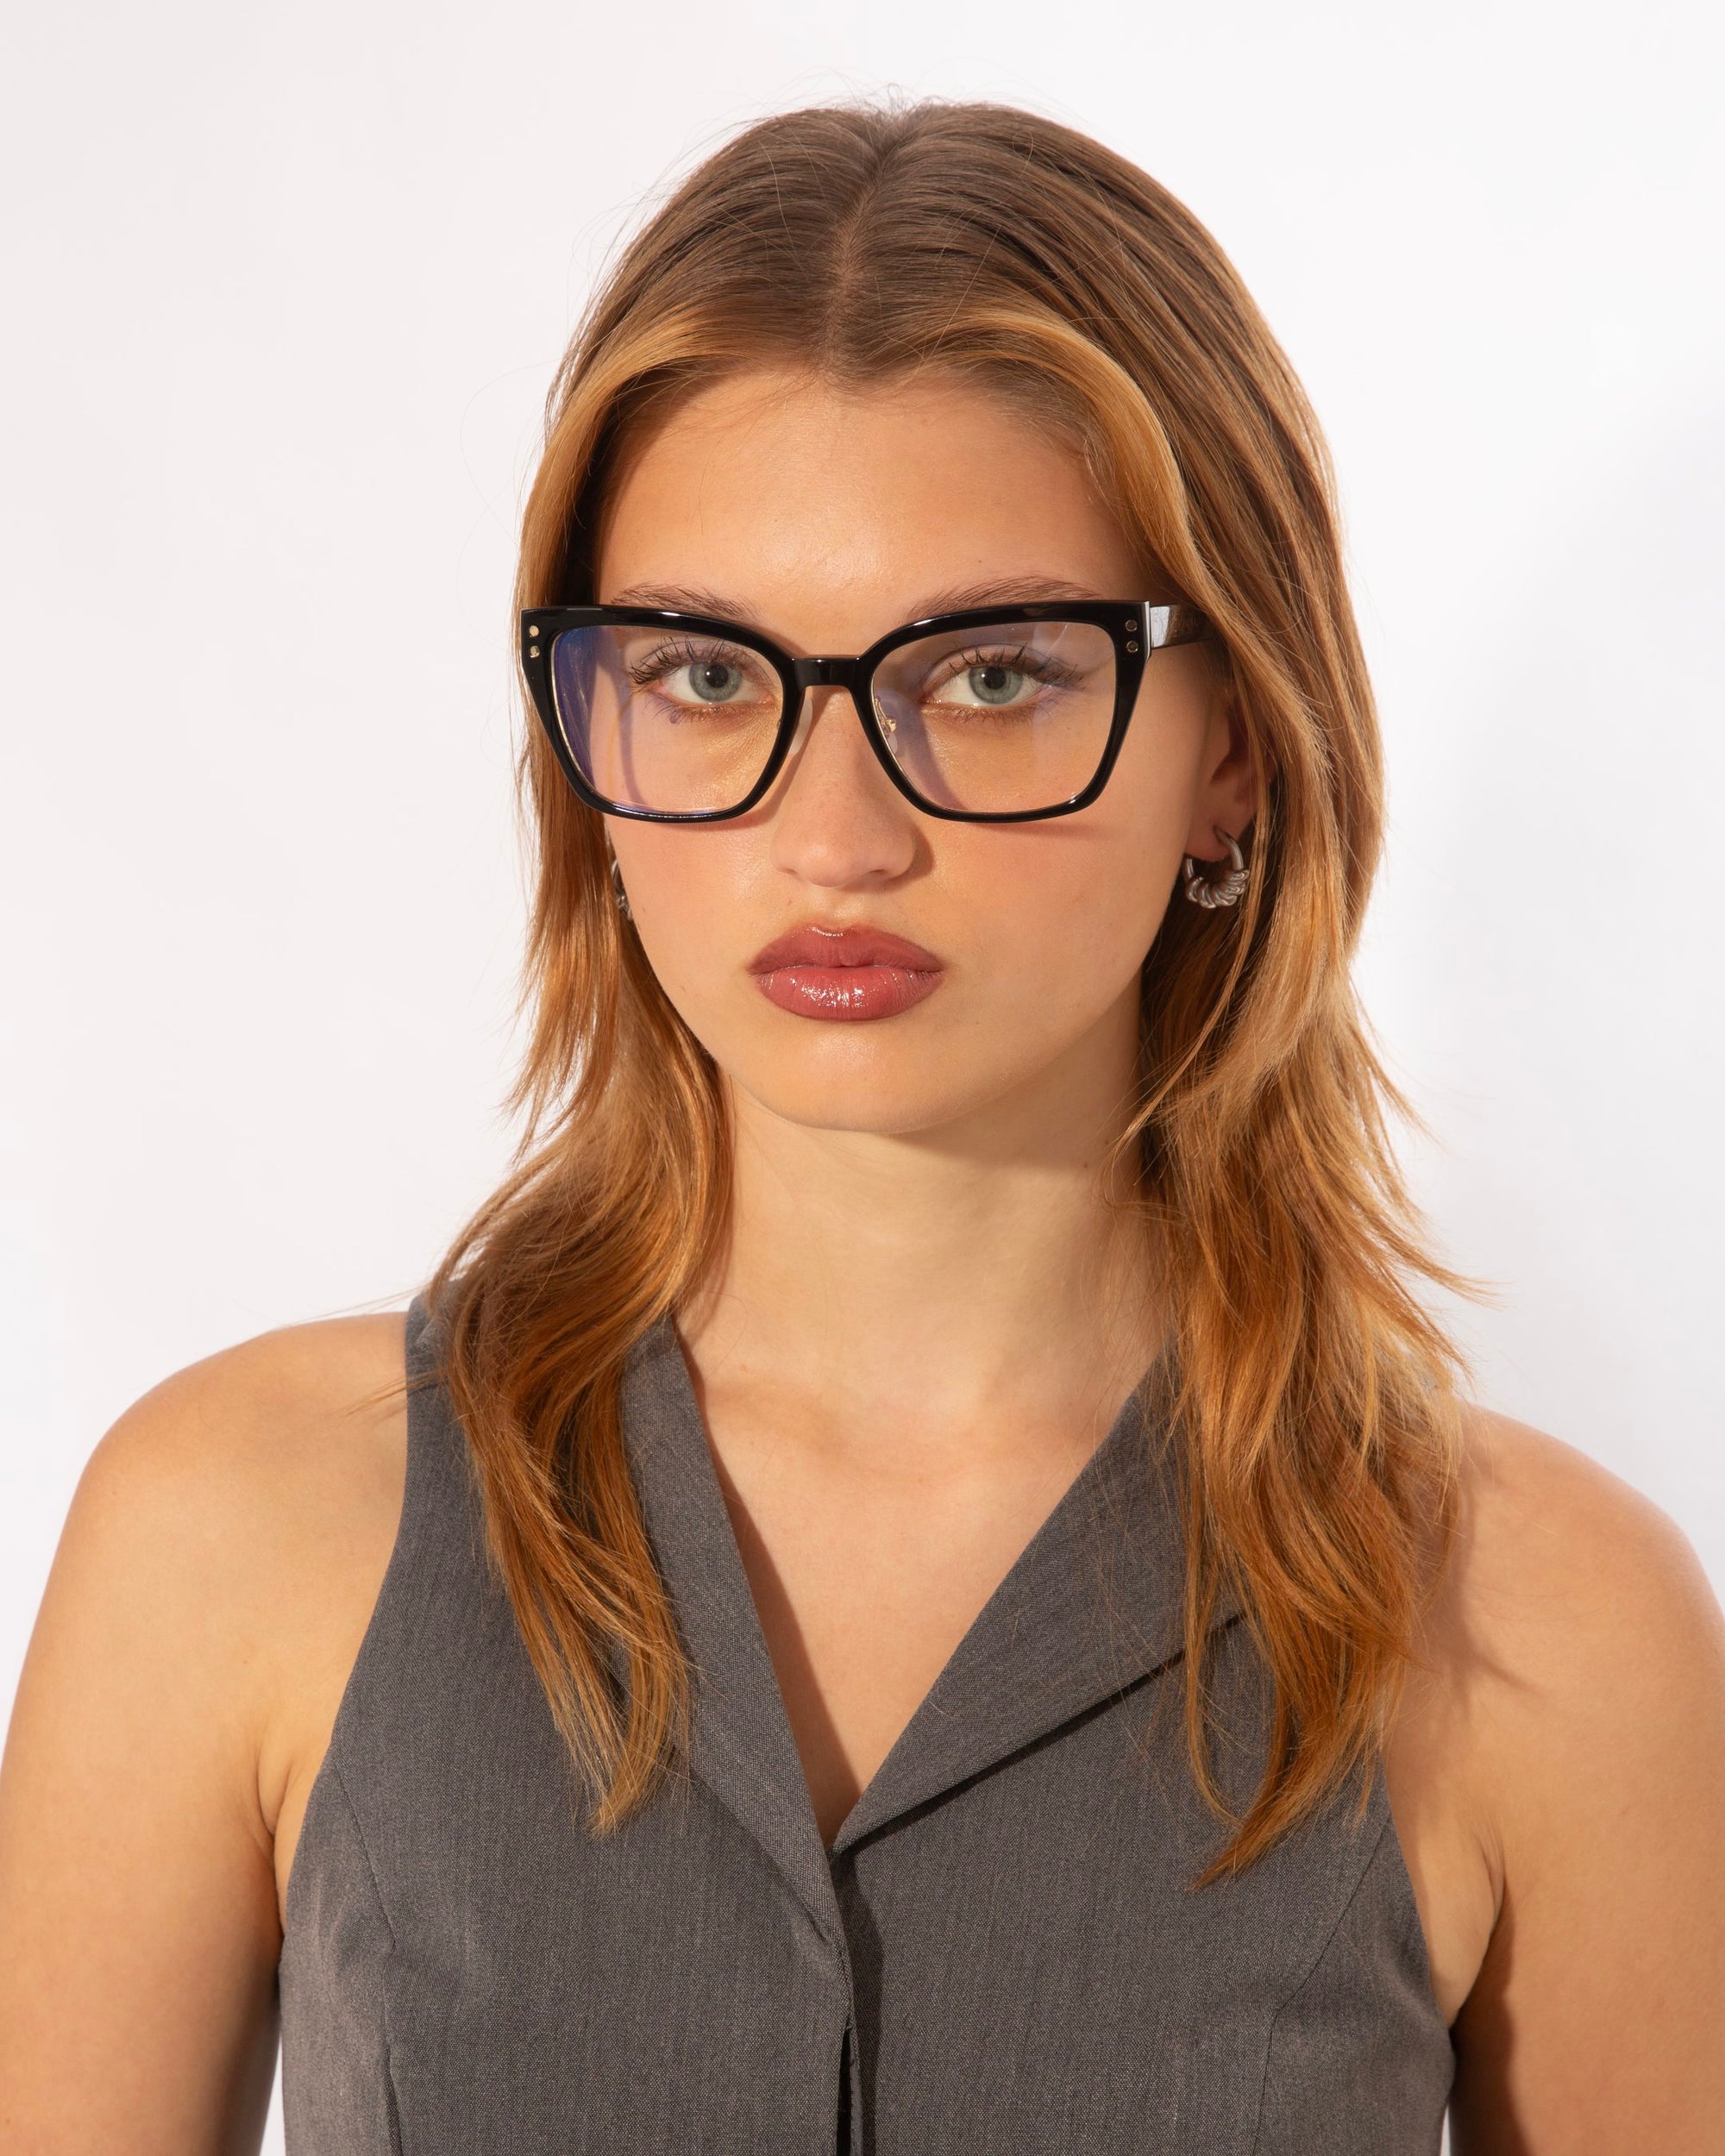 A person with long, light brown hair is wearing black-rimmed glasses and a gray sleeveless top. The Abbey by For Art's Sake® frames their neutral expression perfectly, set against a plain white background.